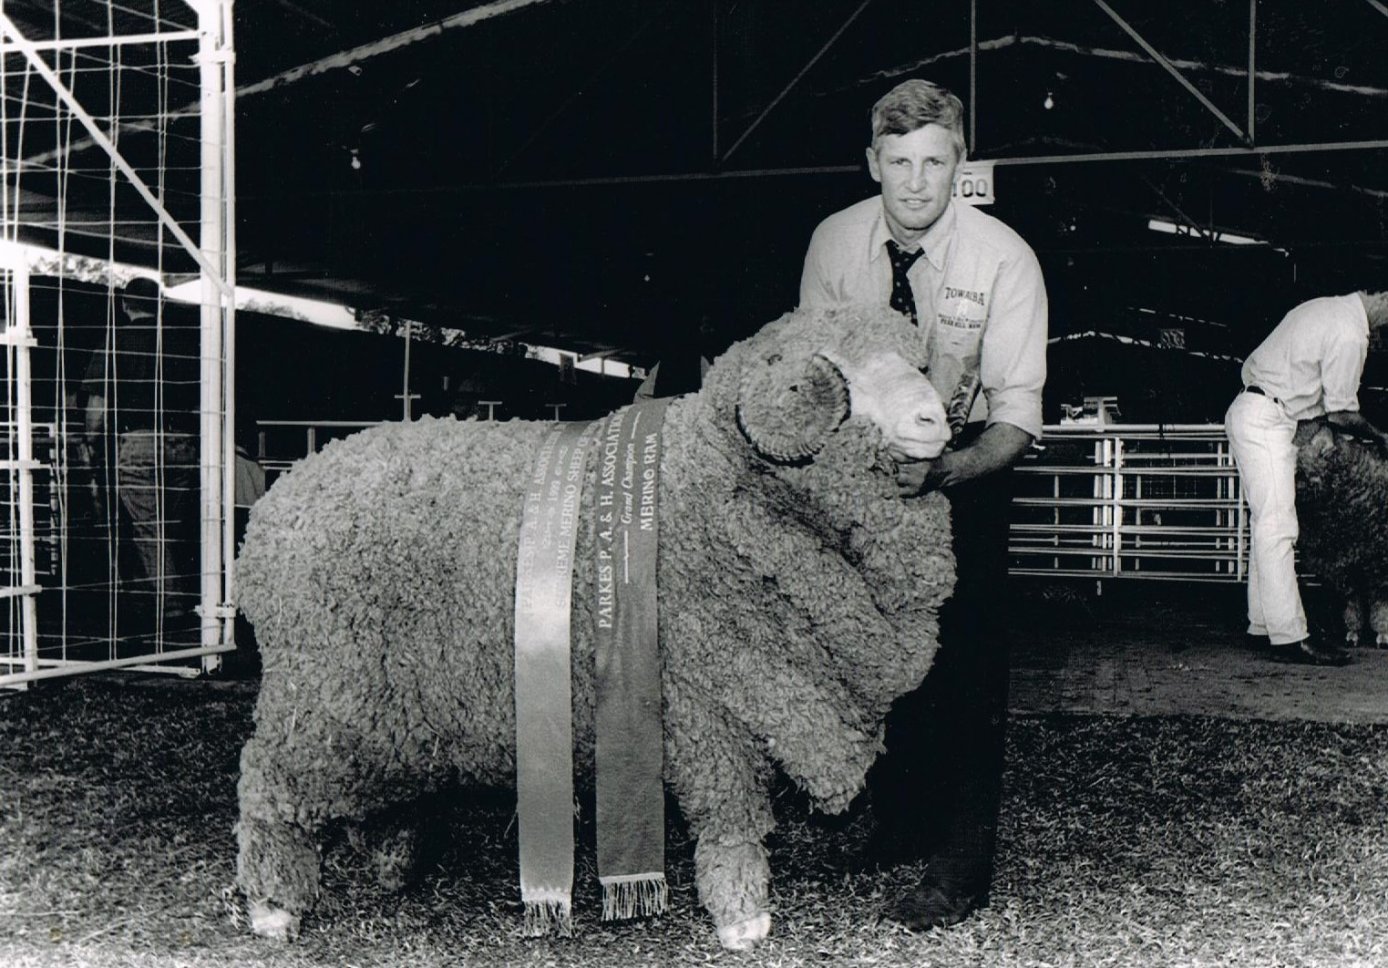 Warick with the 1999 Supreme Merino Exhibit at the Parkes Show.